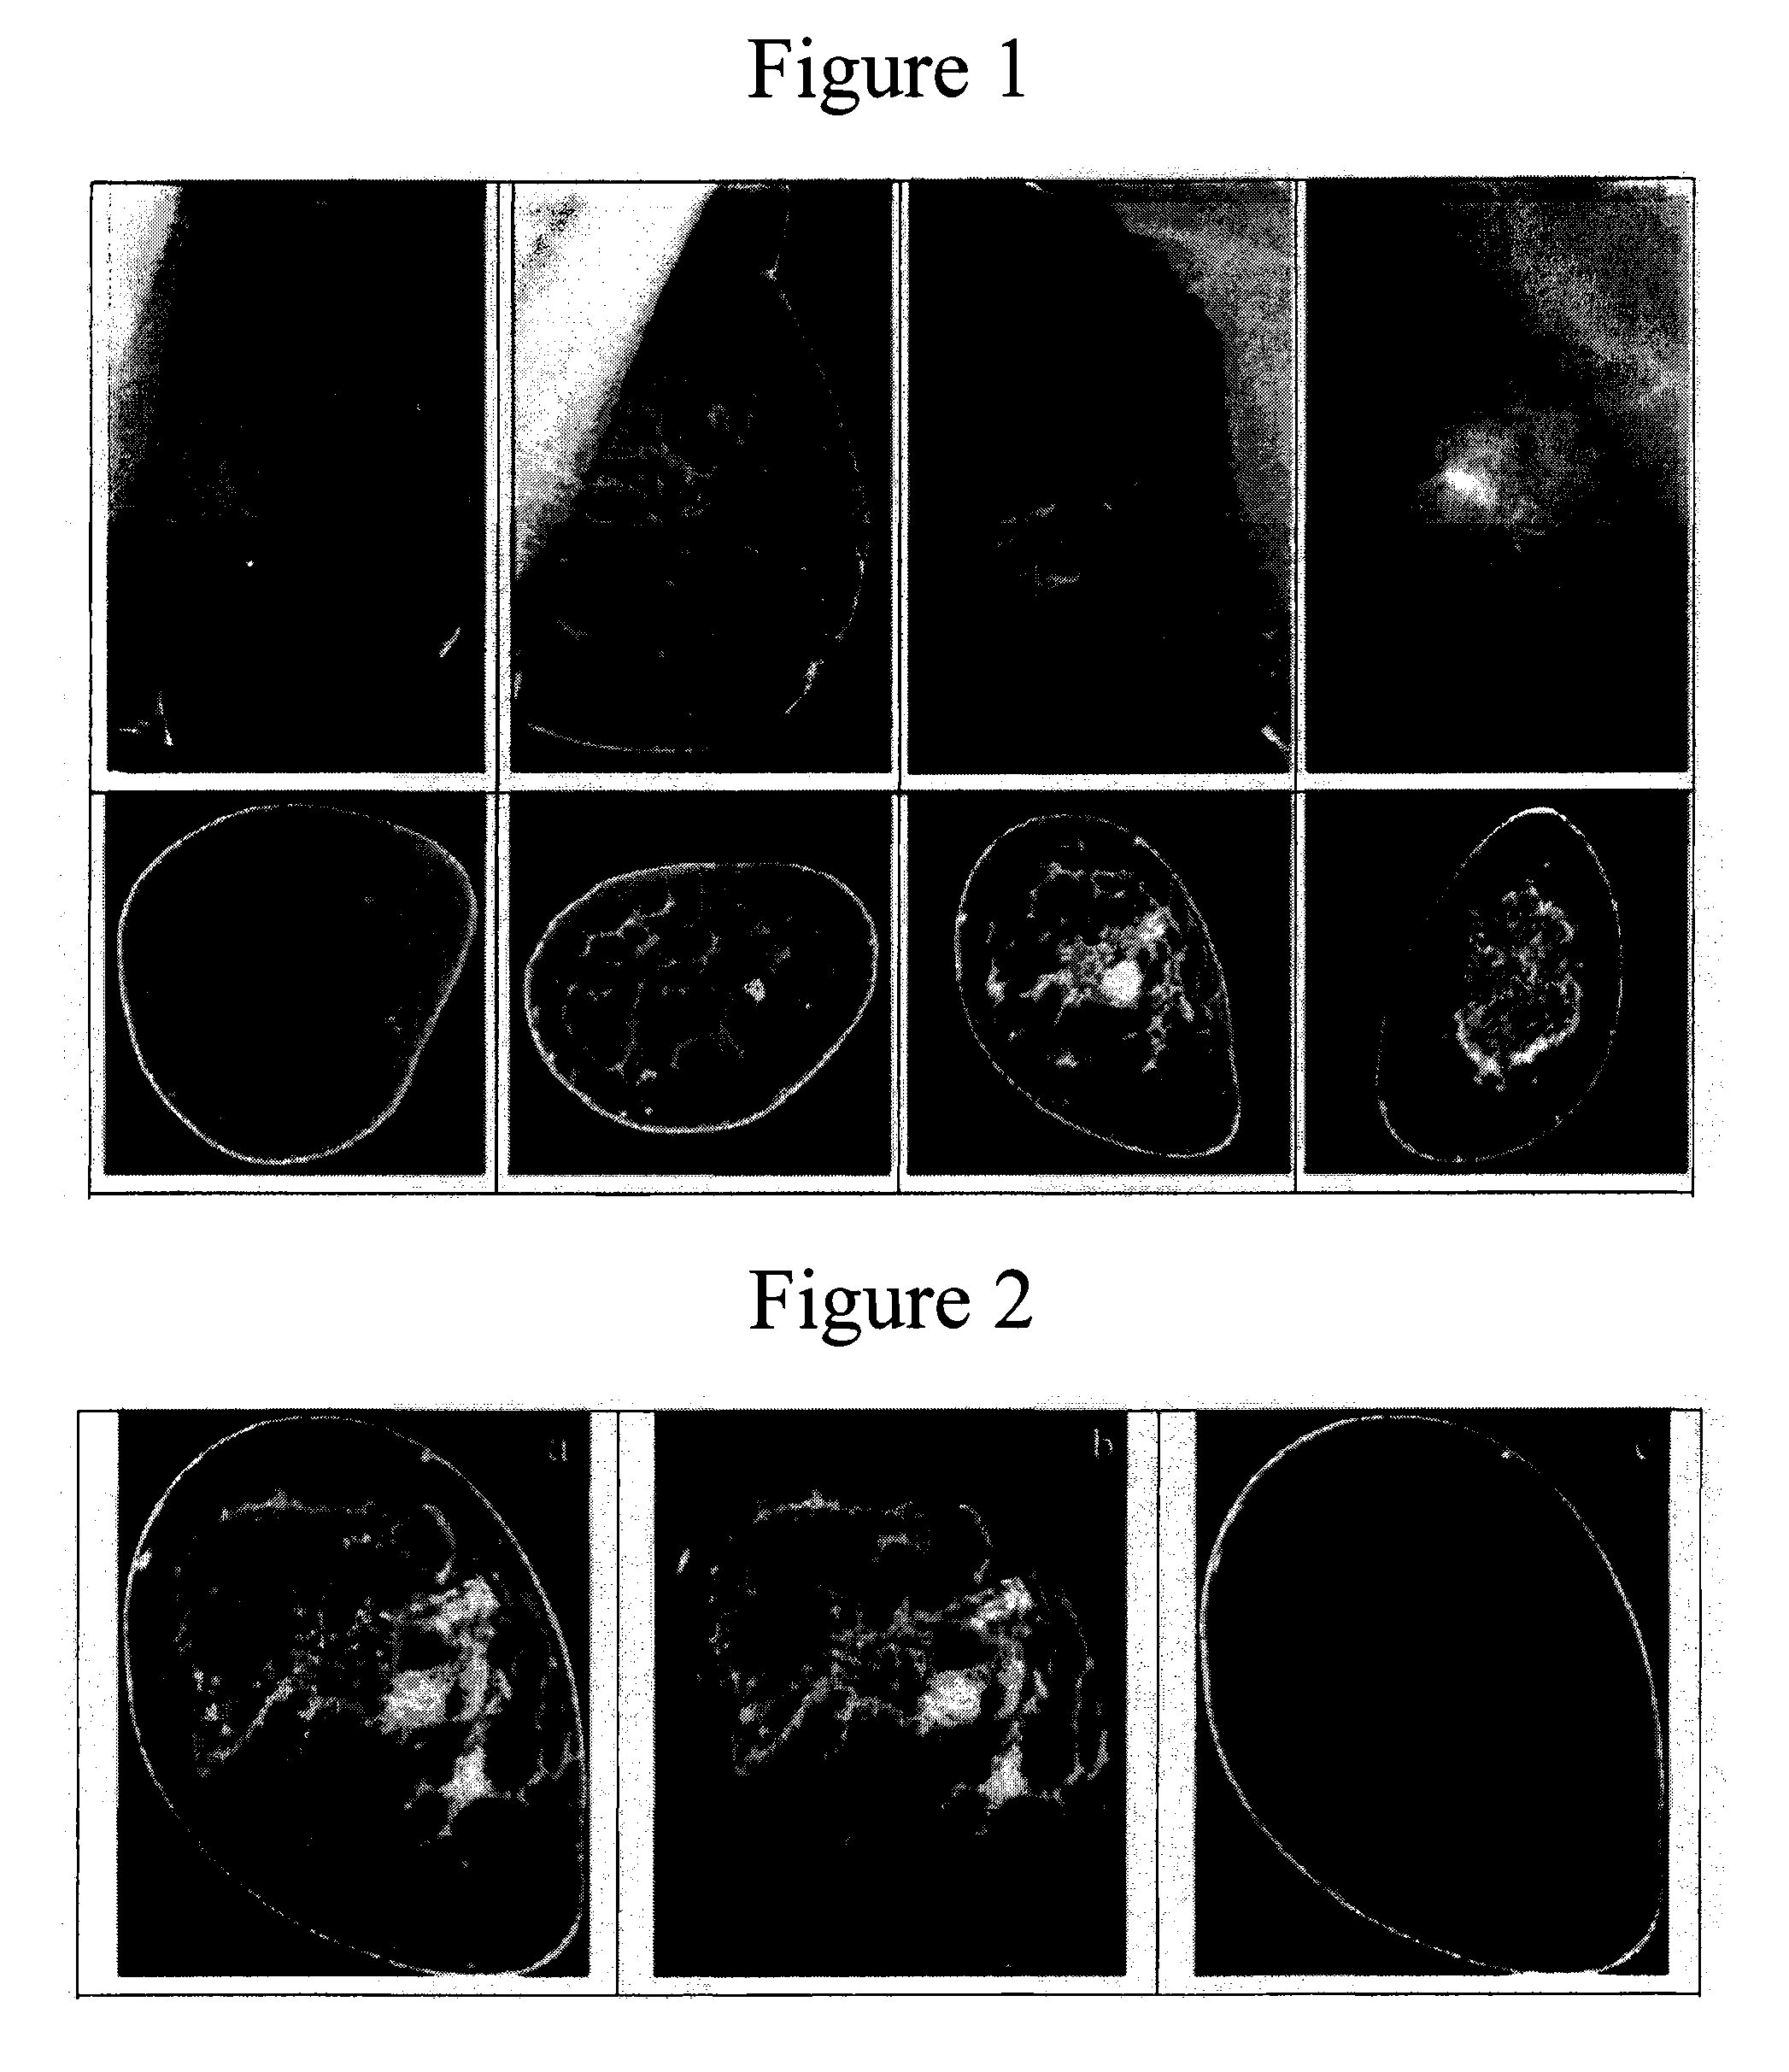 Method and apparatus for cone beam breast CT image-based computer-aided detection and diagnosis